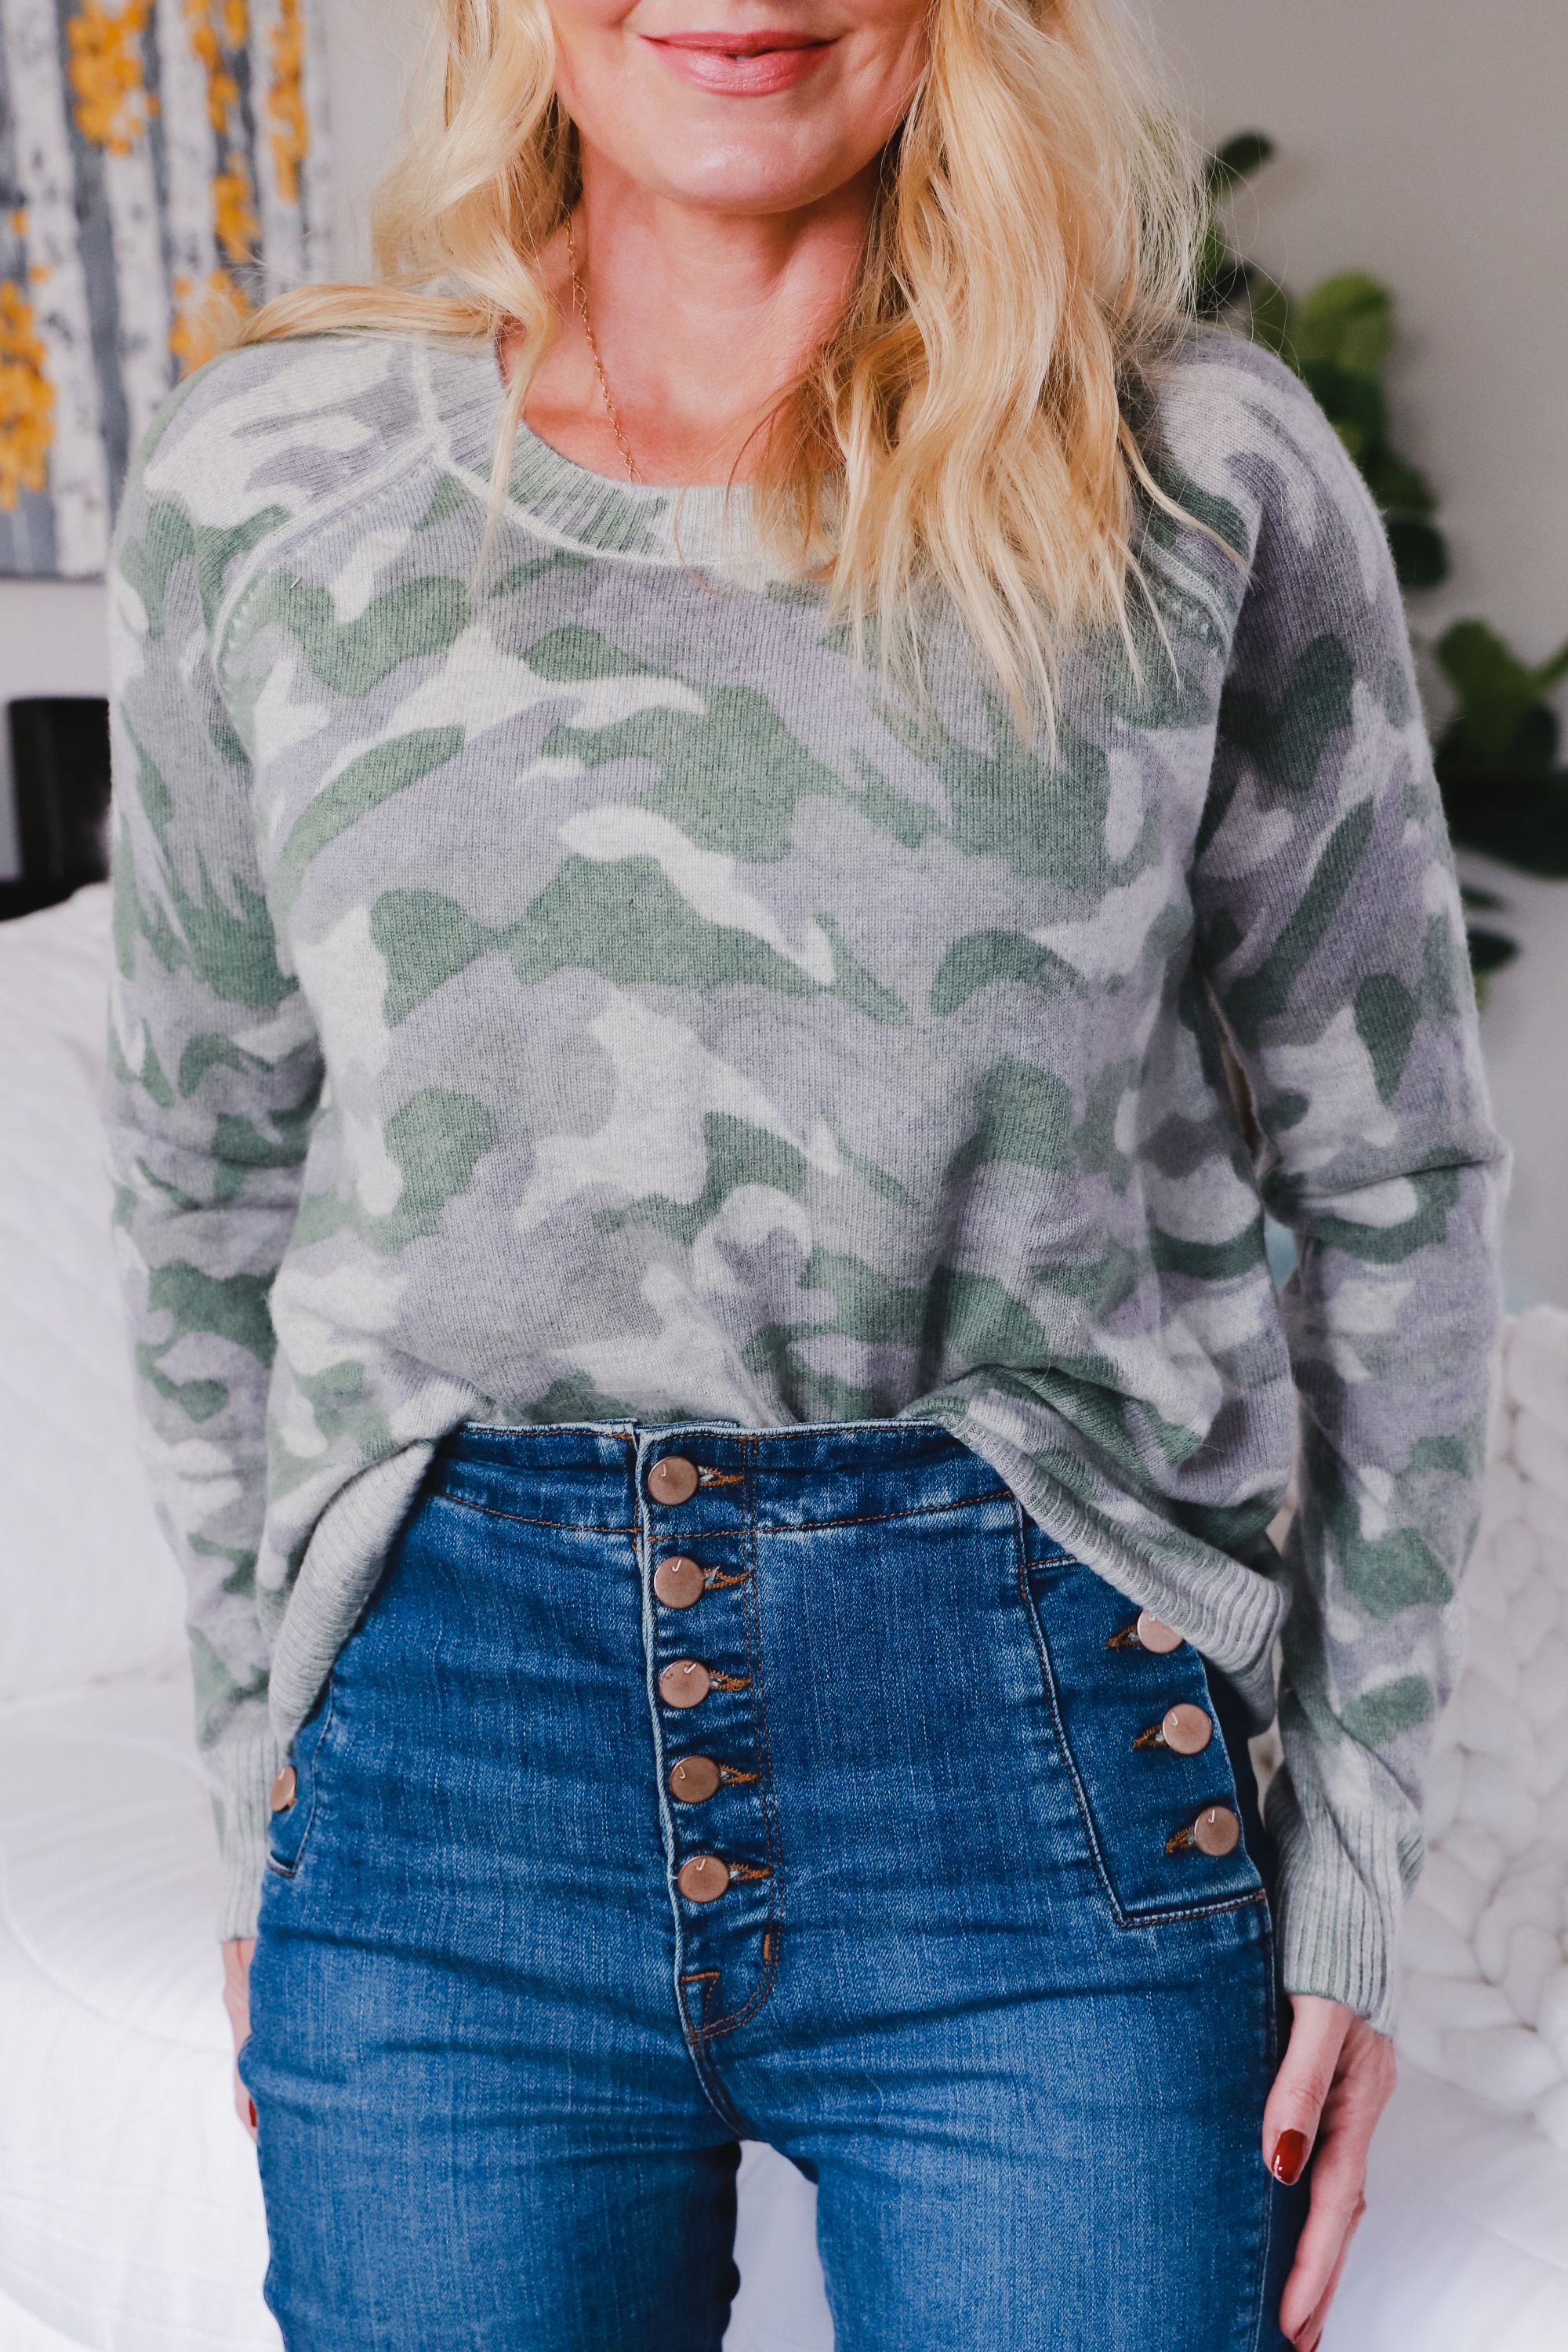 Aqua Cashmere Sweater, Erin Busbee of Busbee Style wearing a green camo cashmere sweater by Aqua from Bloomingdale's with J Brand Natasha jeans in Telluride, Colorado